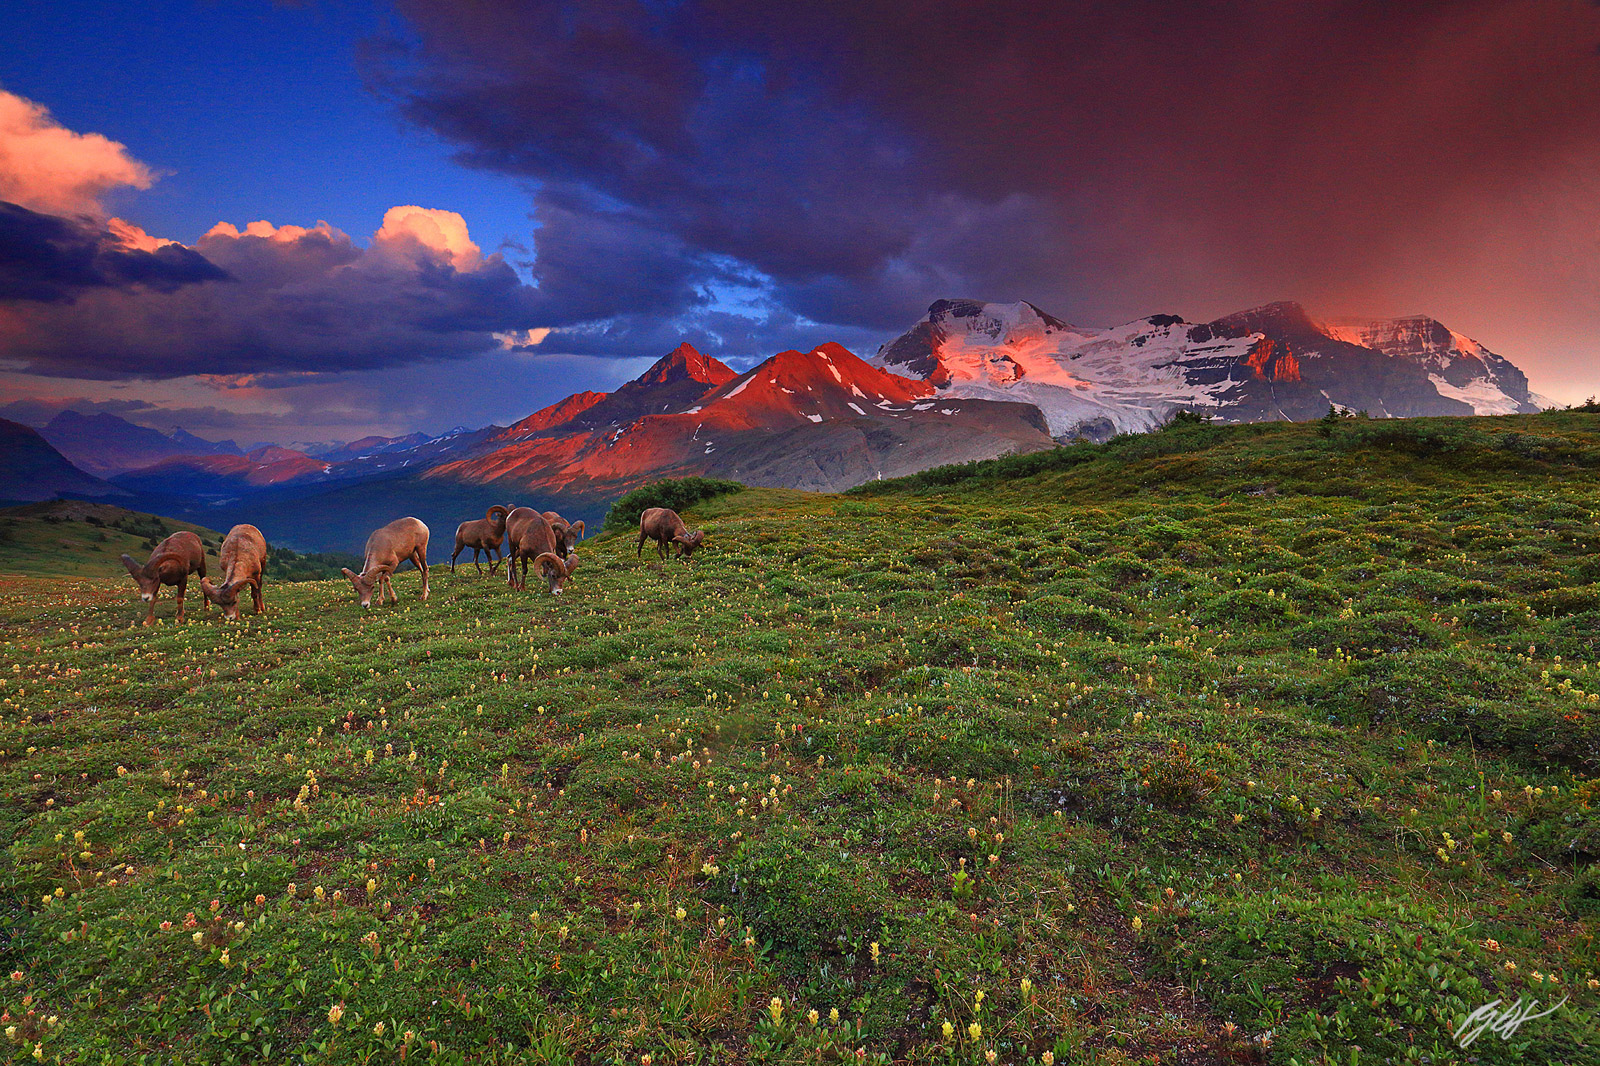 Sunset Mt Athabasca and Big Horn Sheep in Jasper National Park in Canada